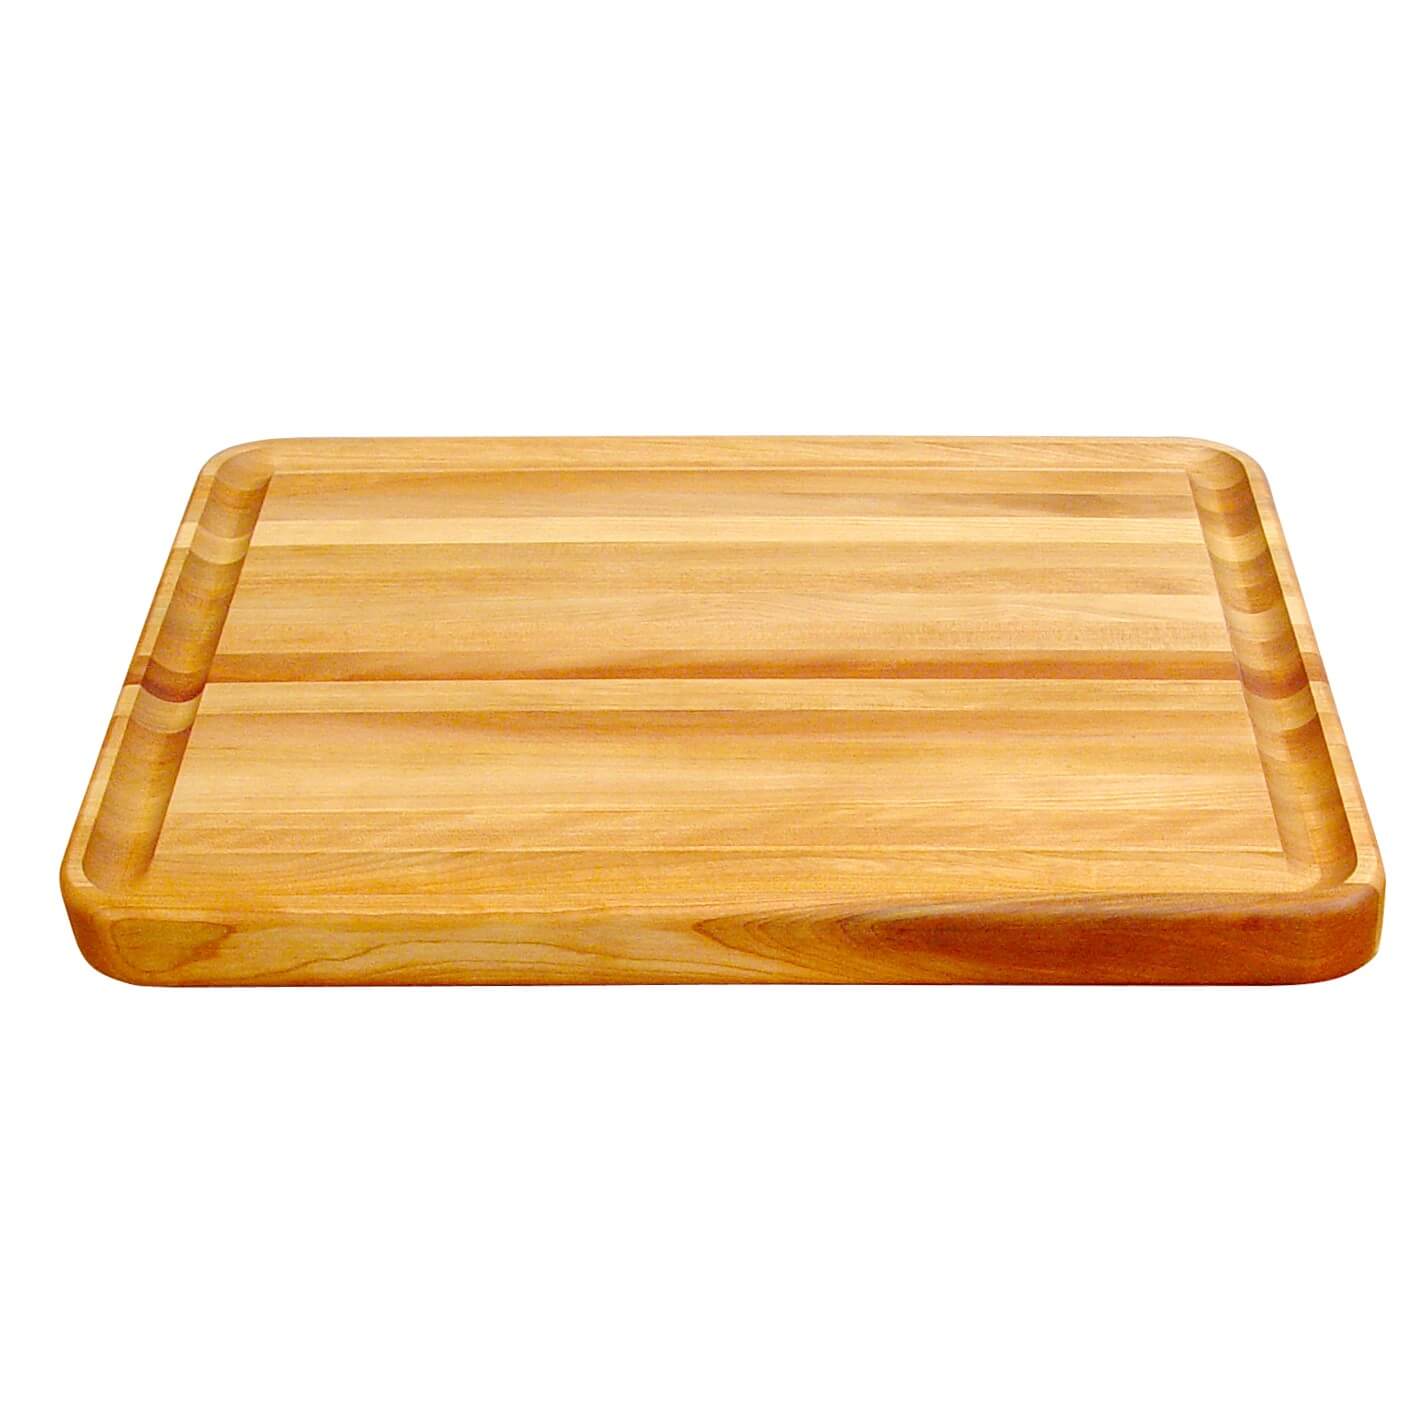 Catskill Professional Reversible Chopping Board w/Groove